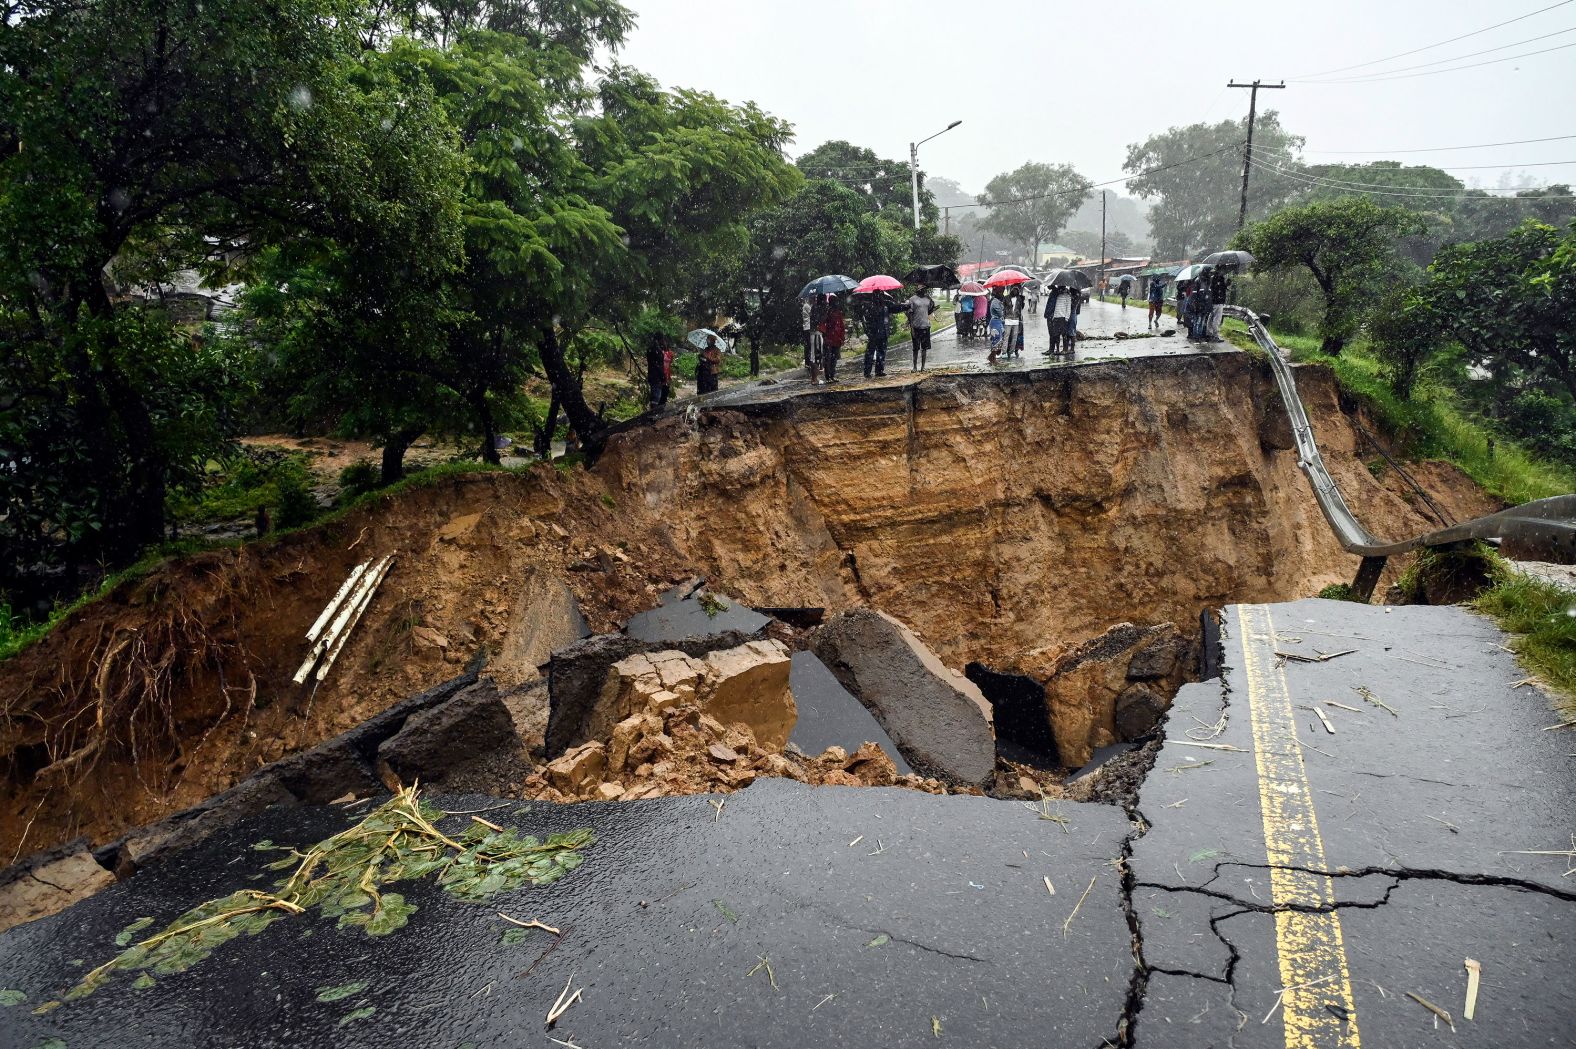 A road connecting the cities of Blantyre and Lilongwe is damaged following heavy rains caused by <a href="index.php?page=&url=https%3A%2F%2Fwww.cnn.com%2F2023%2F03%2F15%2Fafrica%2Fmalawi-death-toll-cyclone-freddy-intl%2Findex.html" target="_blank">Tropical Cyclone Freddy</a> in Blantyre, Malawi, on Tuesday, March 14.